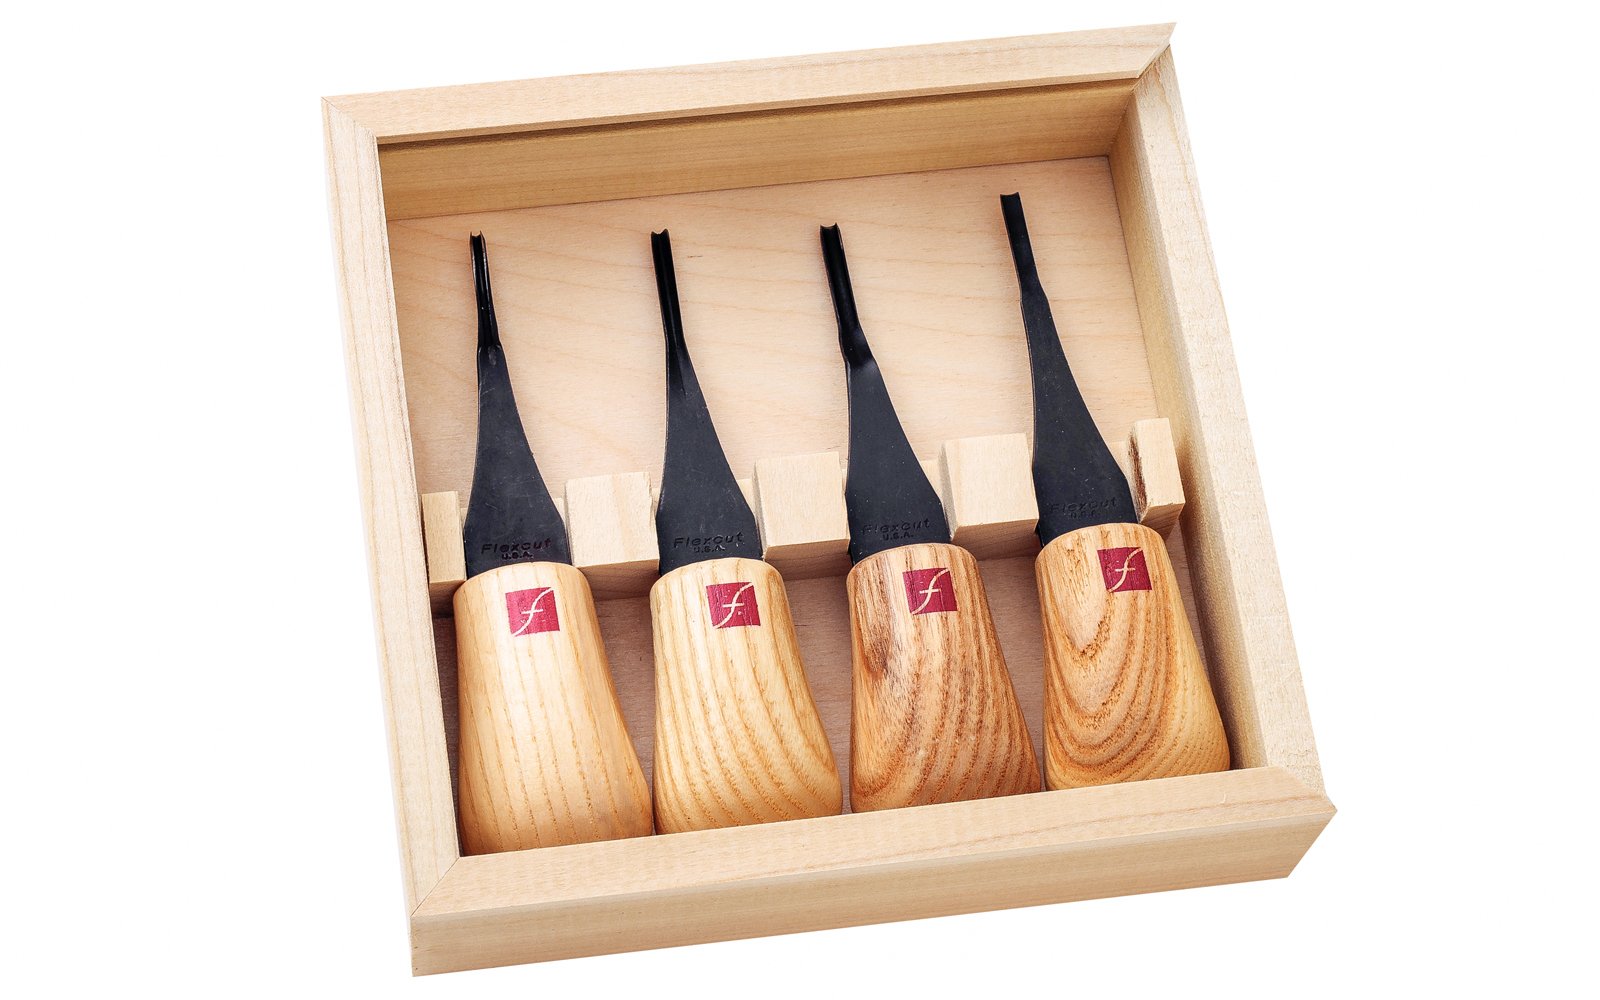 Flexcut Mini Palm Carving Set ~ FR604 - 4-piece set - Includes Sweep #3 x 1/8" (3 mm), Sweep #5 x 1/8" (3 mm), Gouge #11 x 1/16" (2 mm), Parting V-Tool 70° x 1/8" (2mm) - High Carbon Steel blades - Ash wood handles - Palm Carving Tool Set - Made in USA - For miniature carving ~ 651646006040